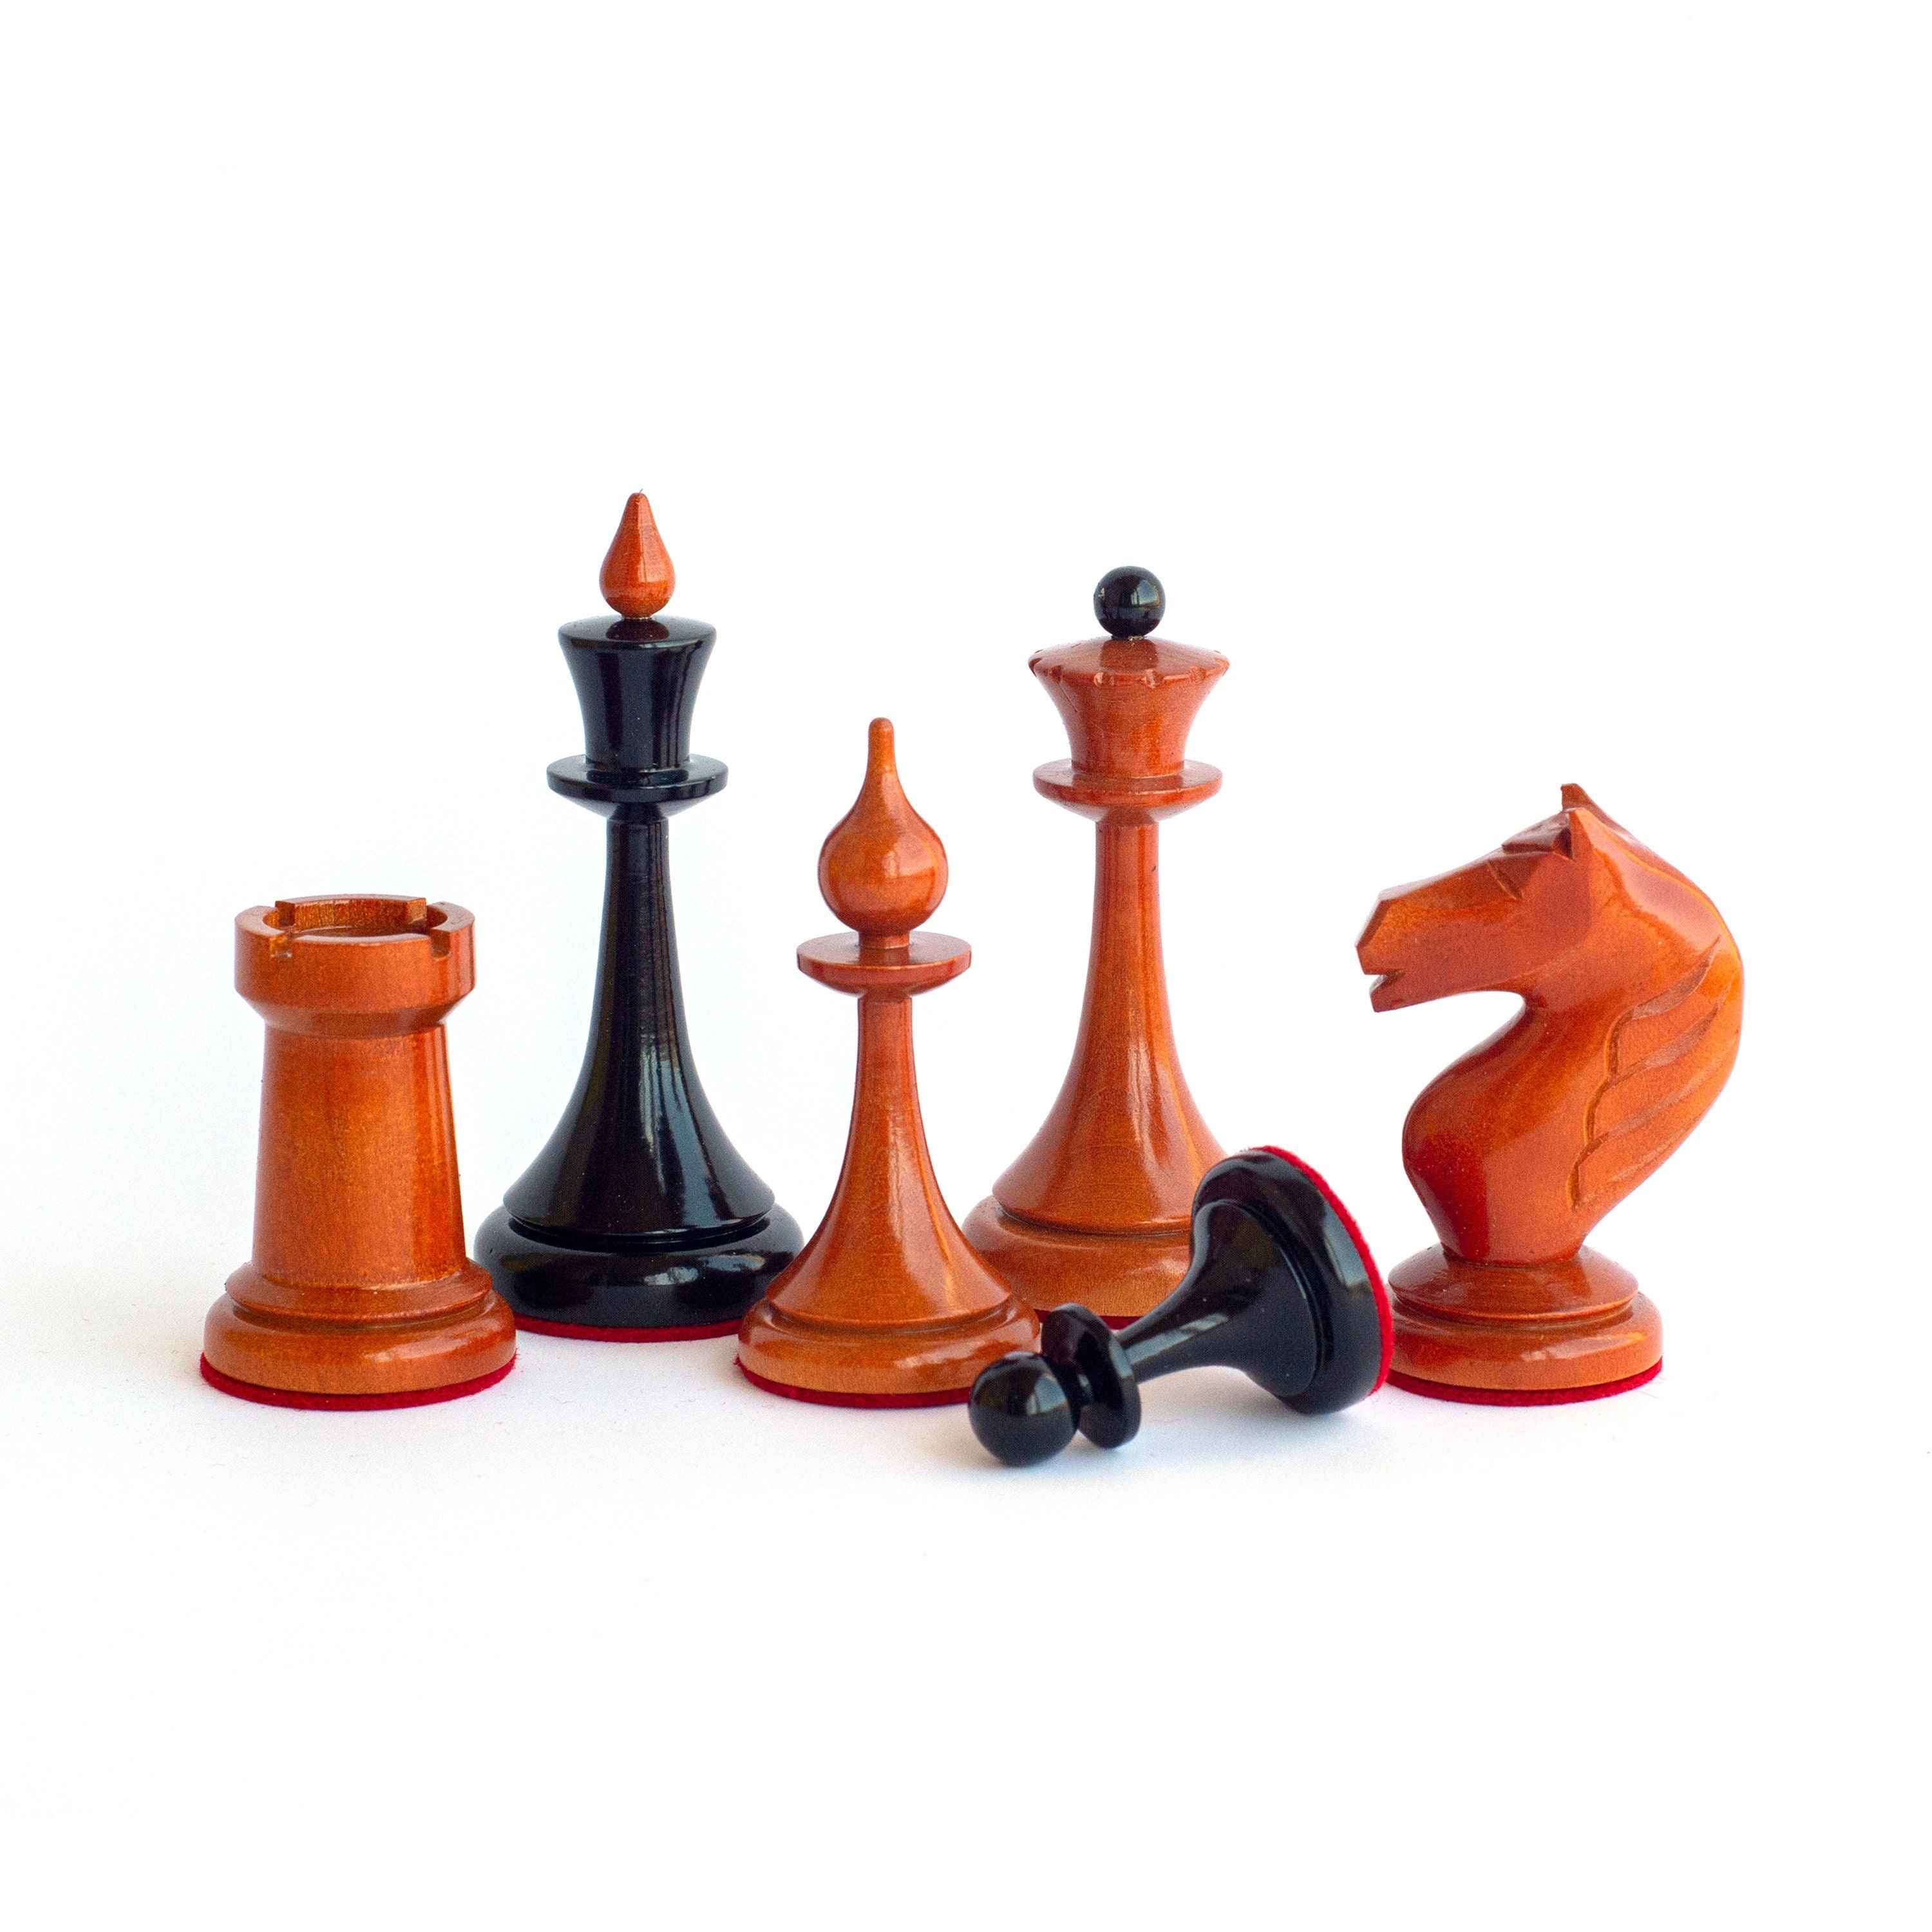 Pawn PNG - Chess Pawn, White Pawn, Pawn Shop, Red Pawn. - CleanPNG